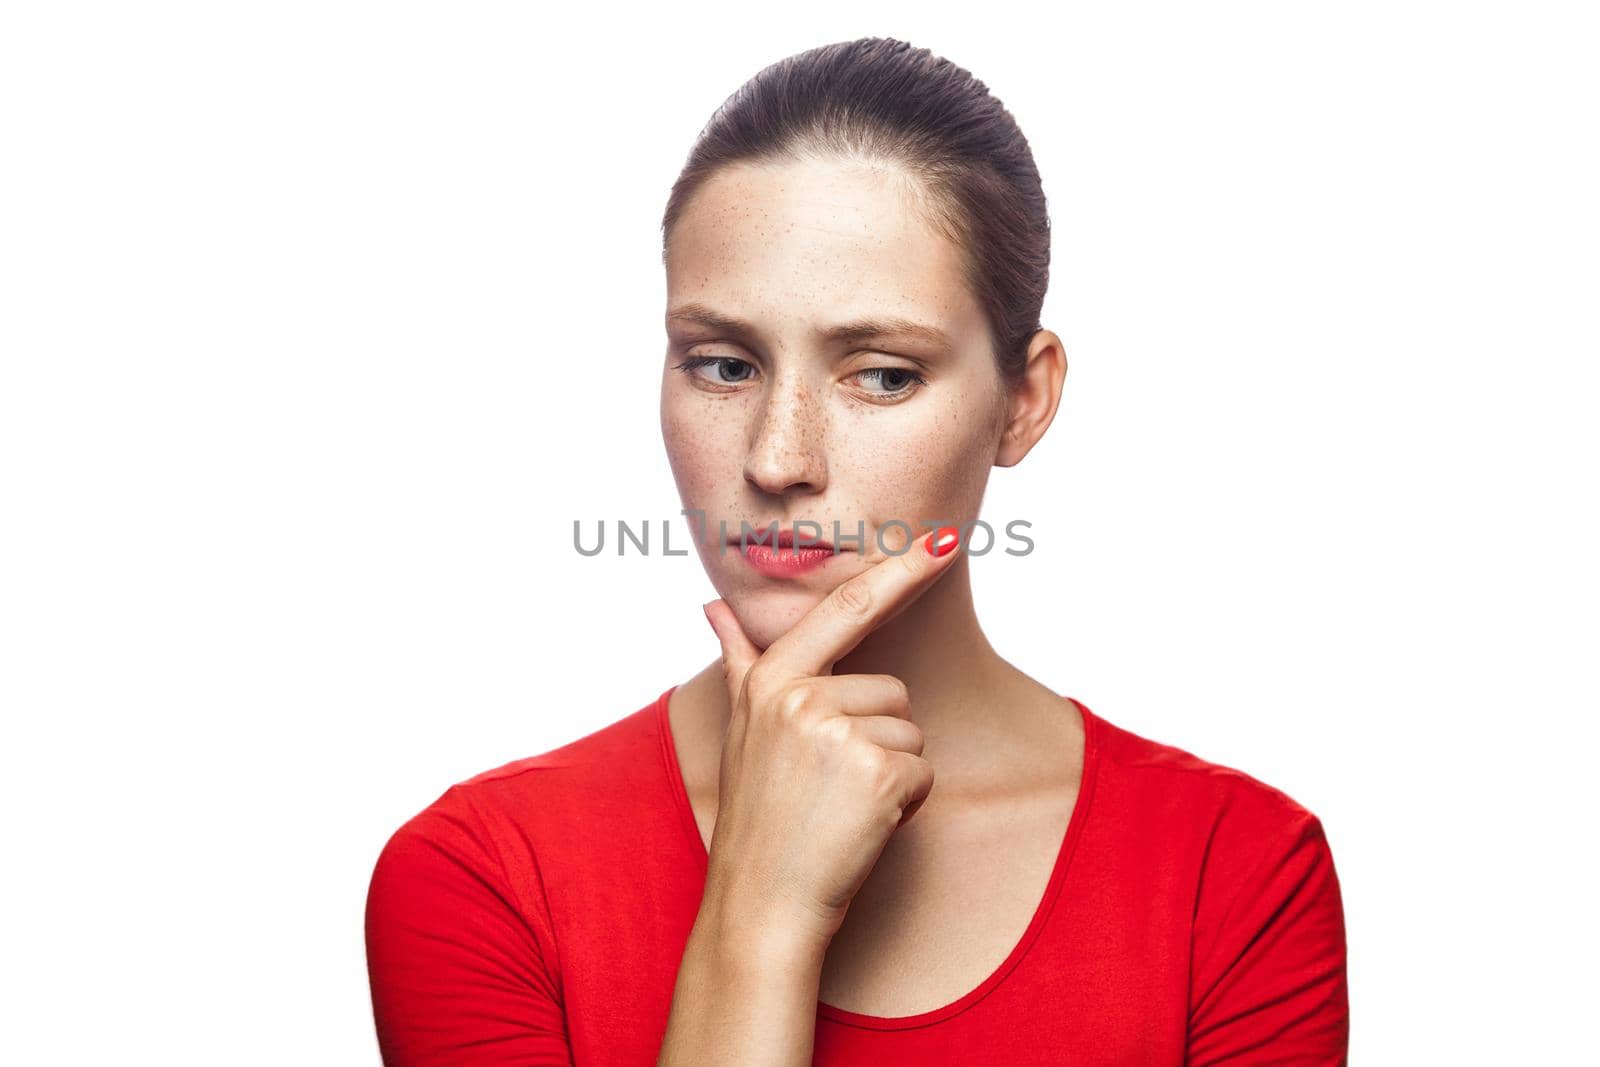 Portrait of thoughtful serious woman in red t-shirt with freckles by Khosro1